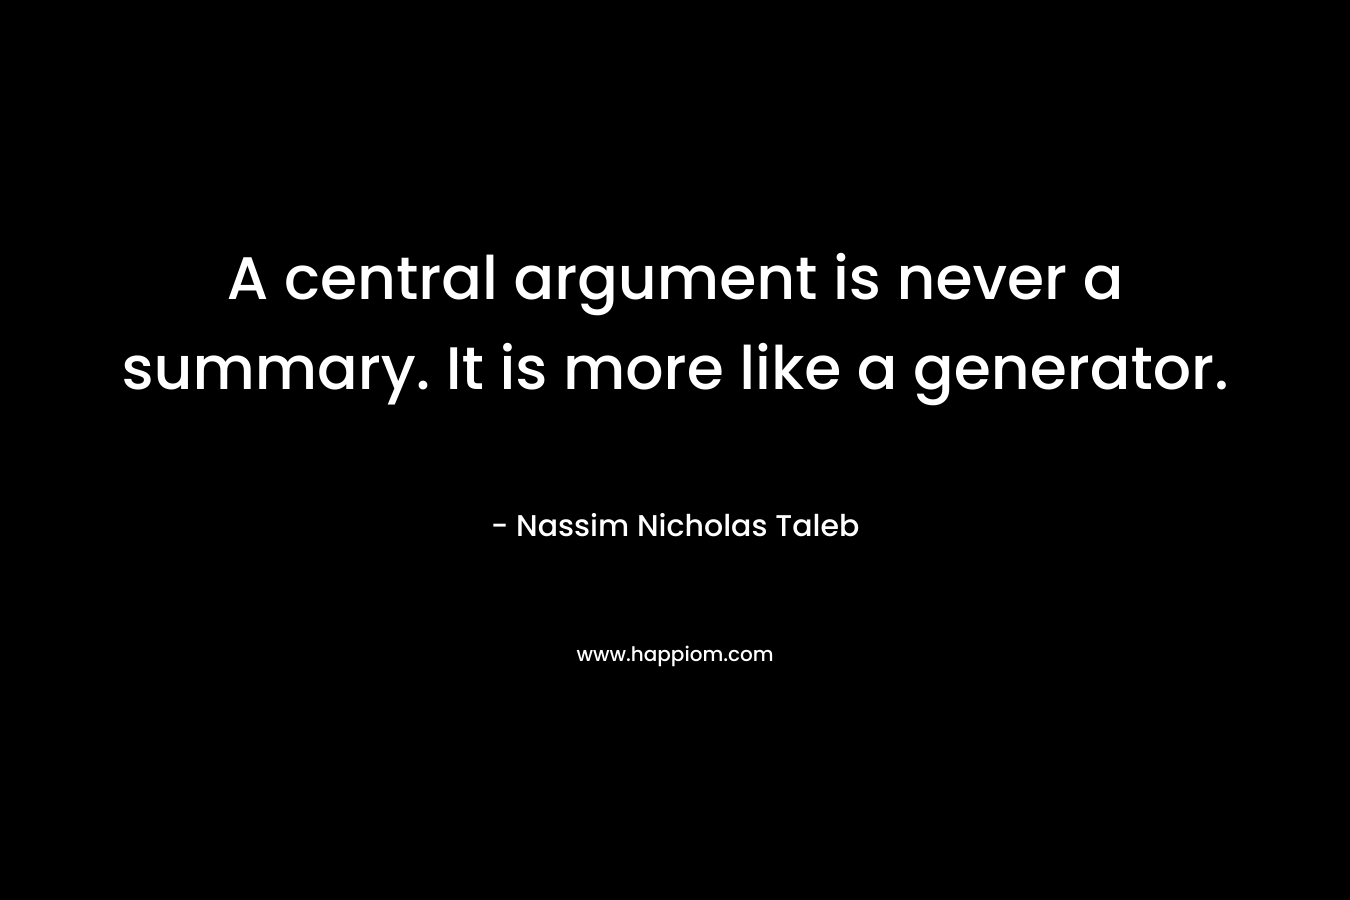 A central argument is never a summary. It is more like a generator. – Nassim Nicholas Taleb